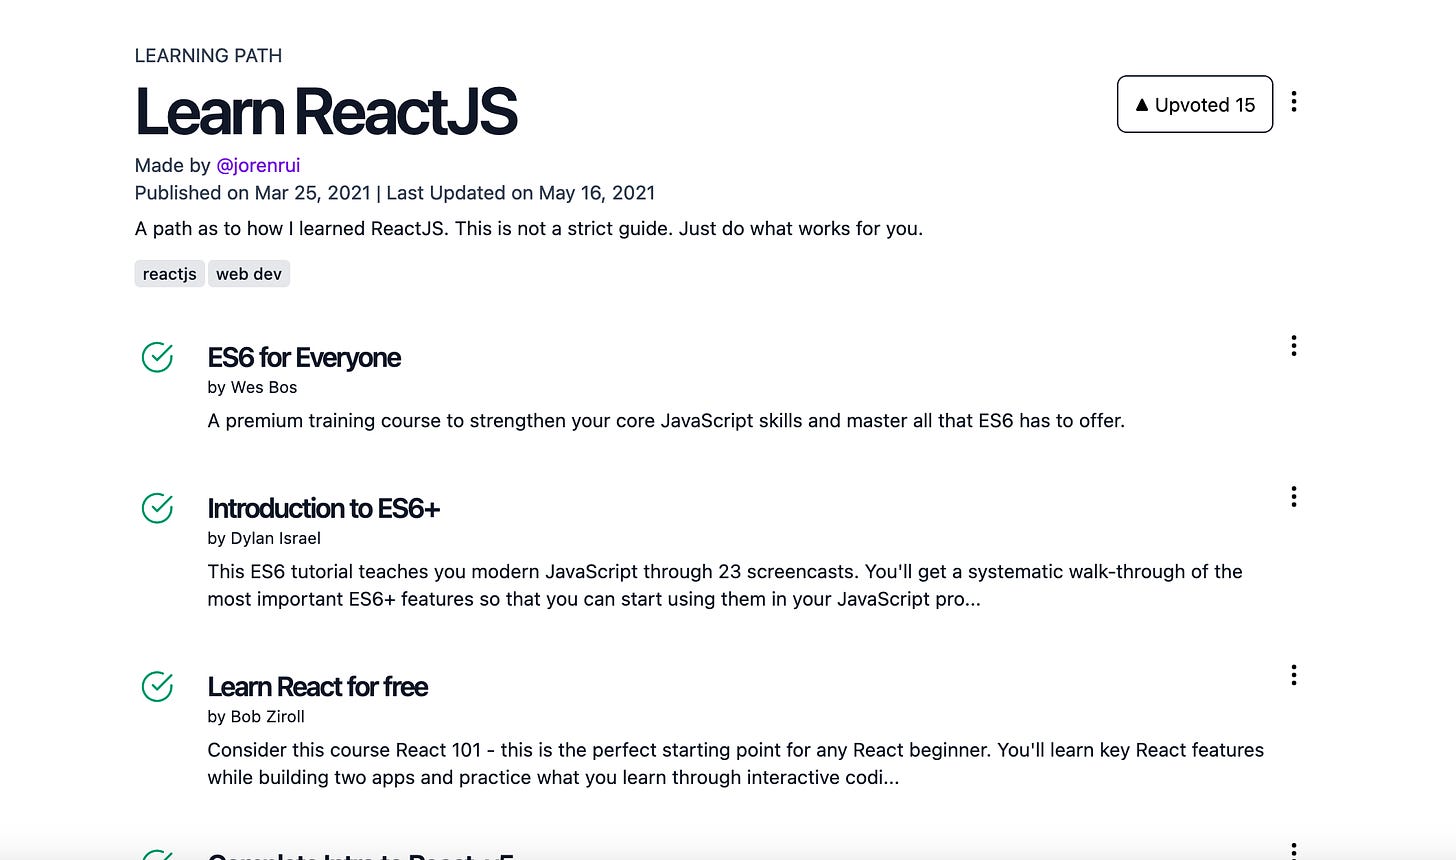 A learning path page with a title of "Learn ReactJS". It lists resources like "ES6 for Everyone", kinda like a curriculum.